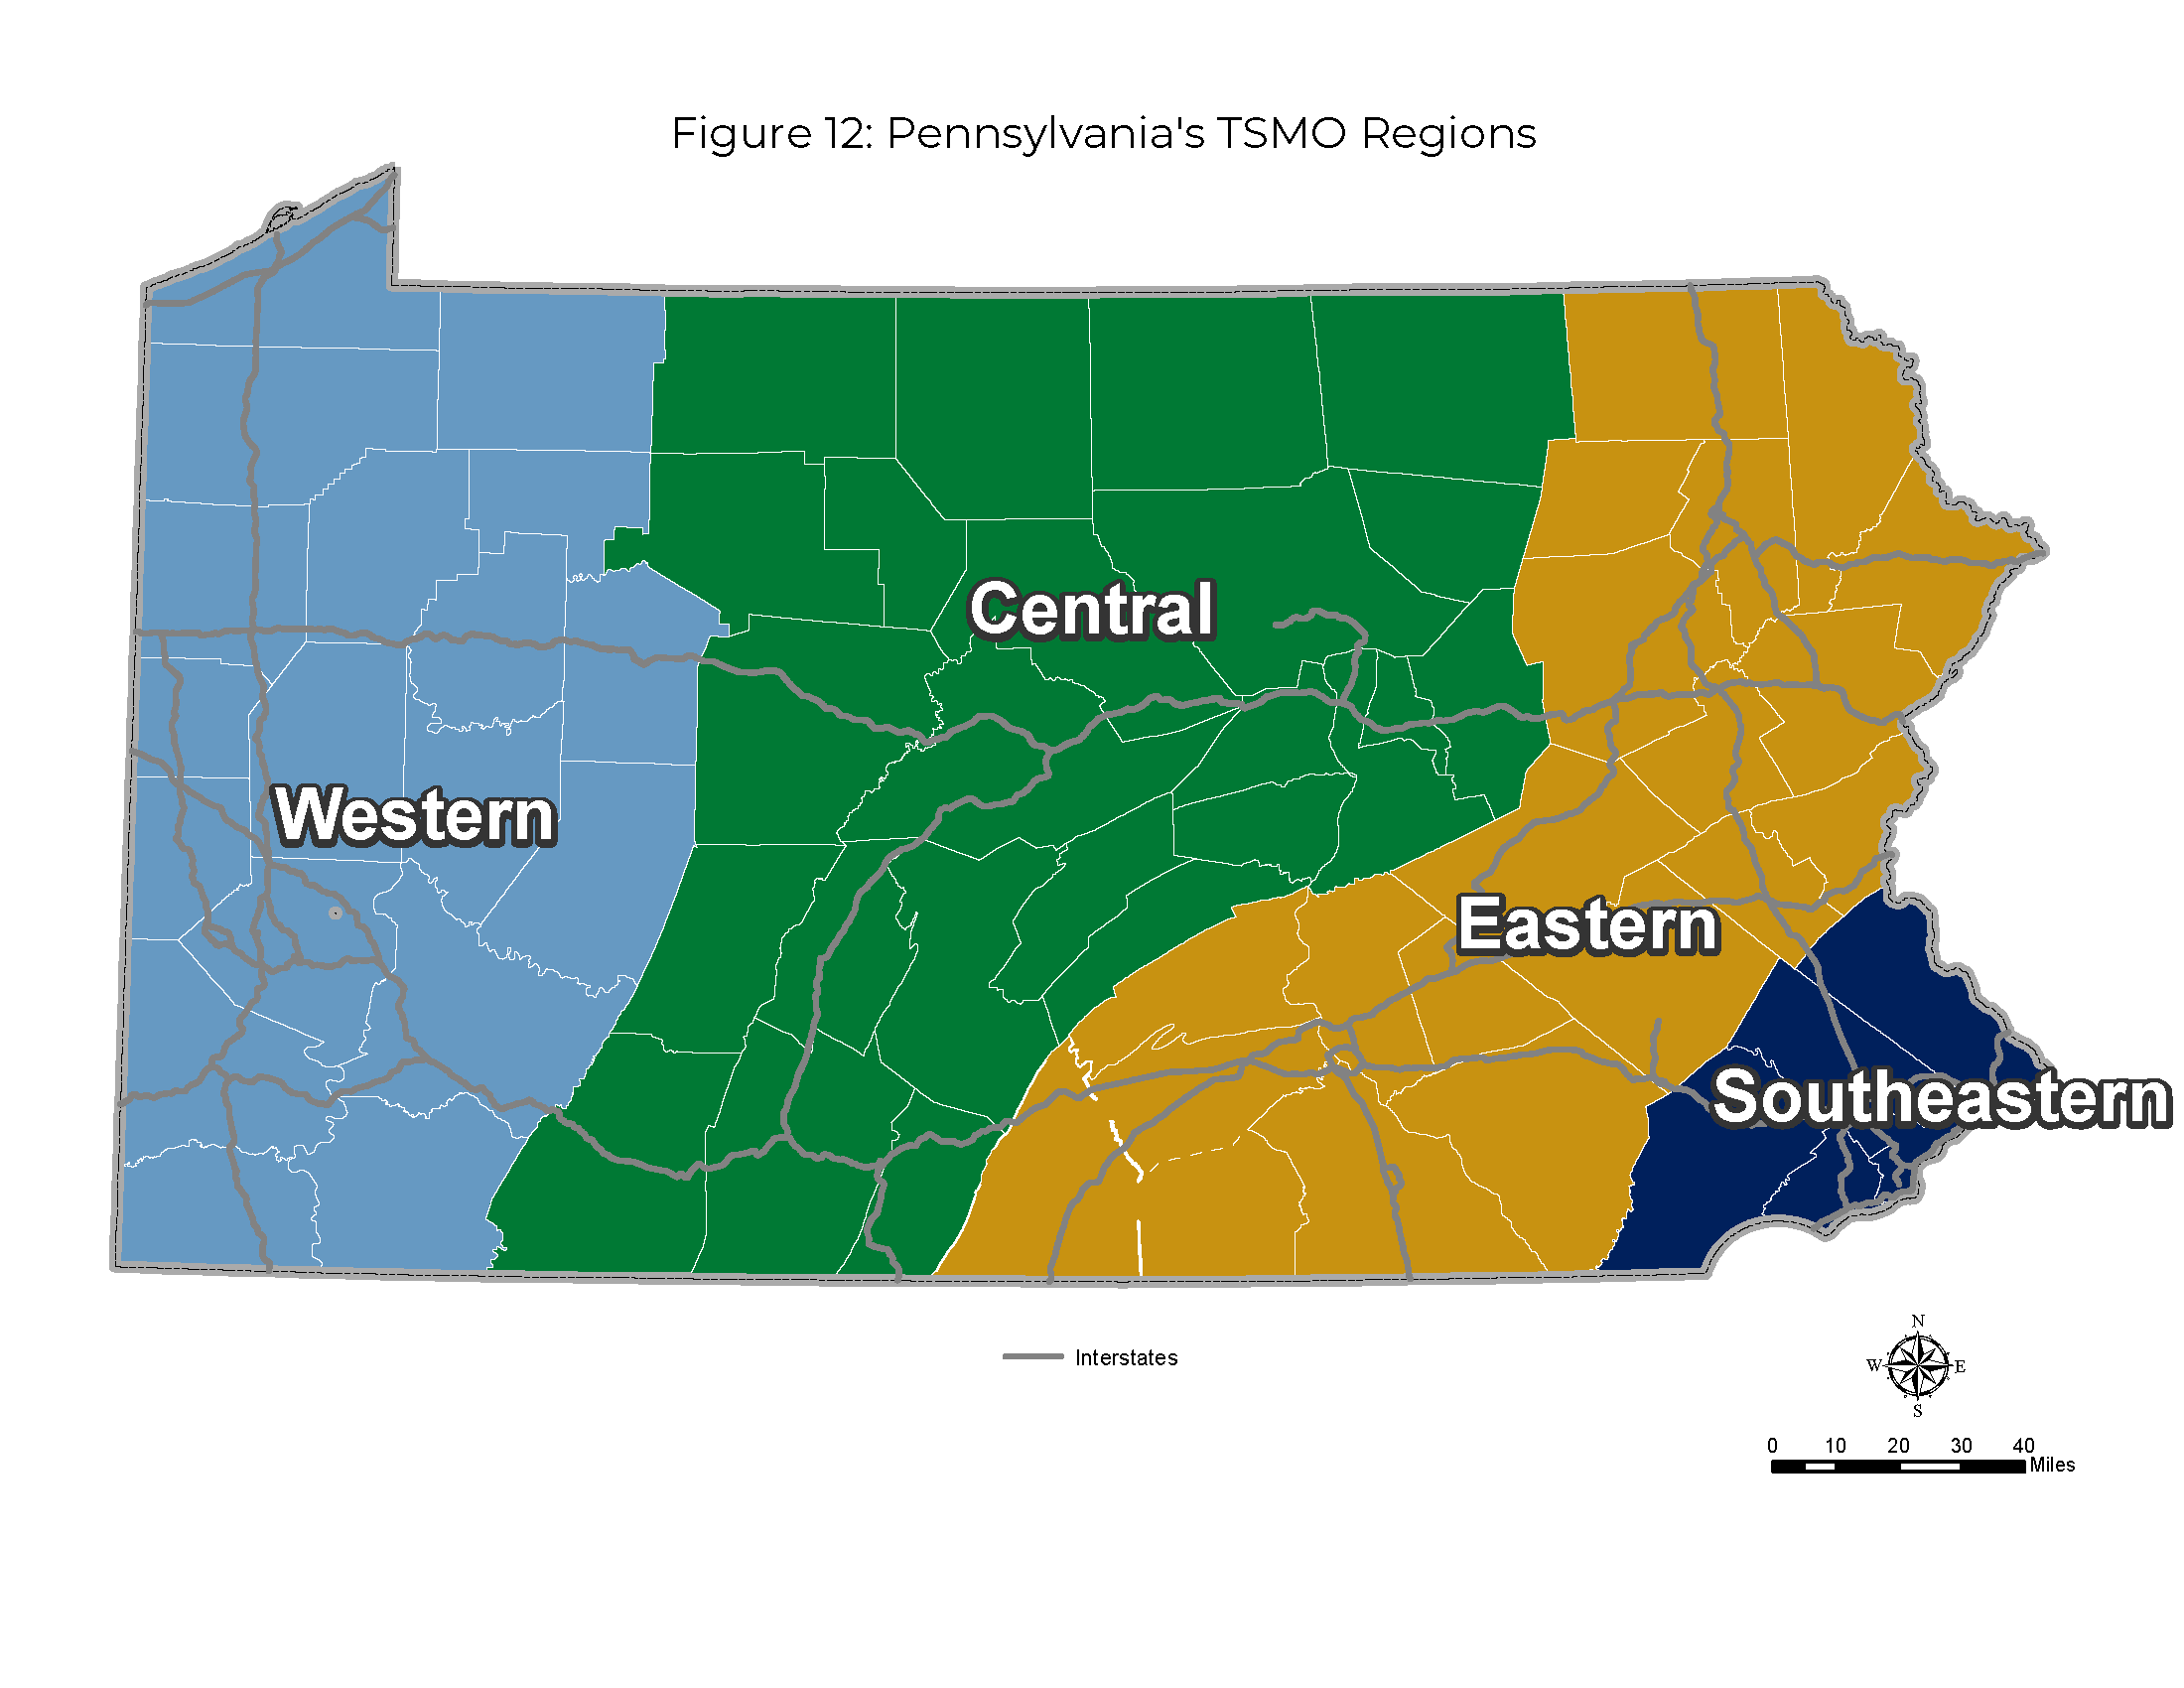 A state map of Pennsylvania illustrating the four Transportation Systems Management and Operation regions of Western, Central, Eastern, and Southeastern.